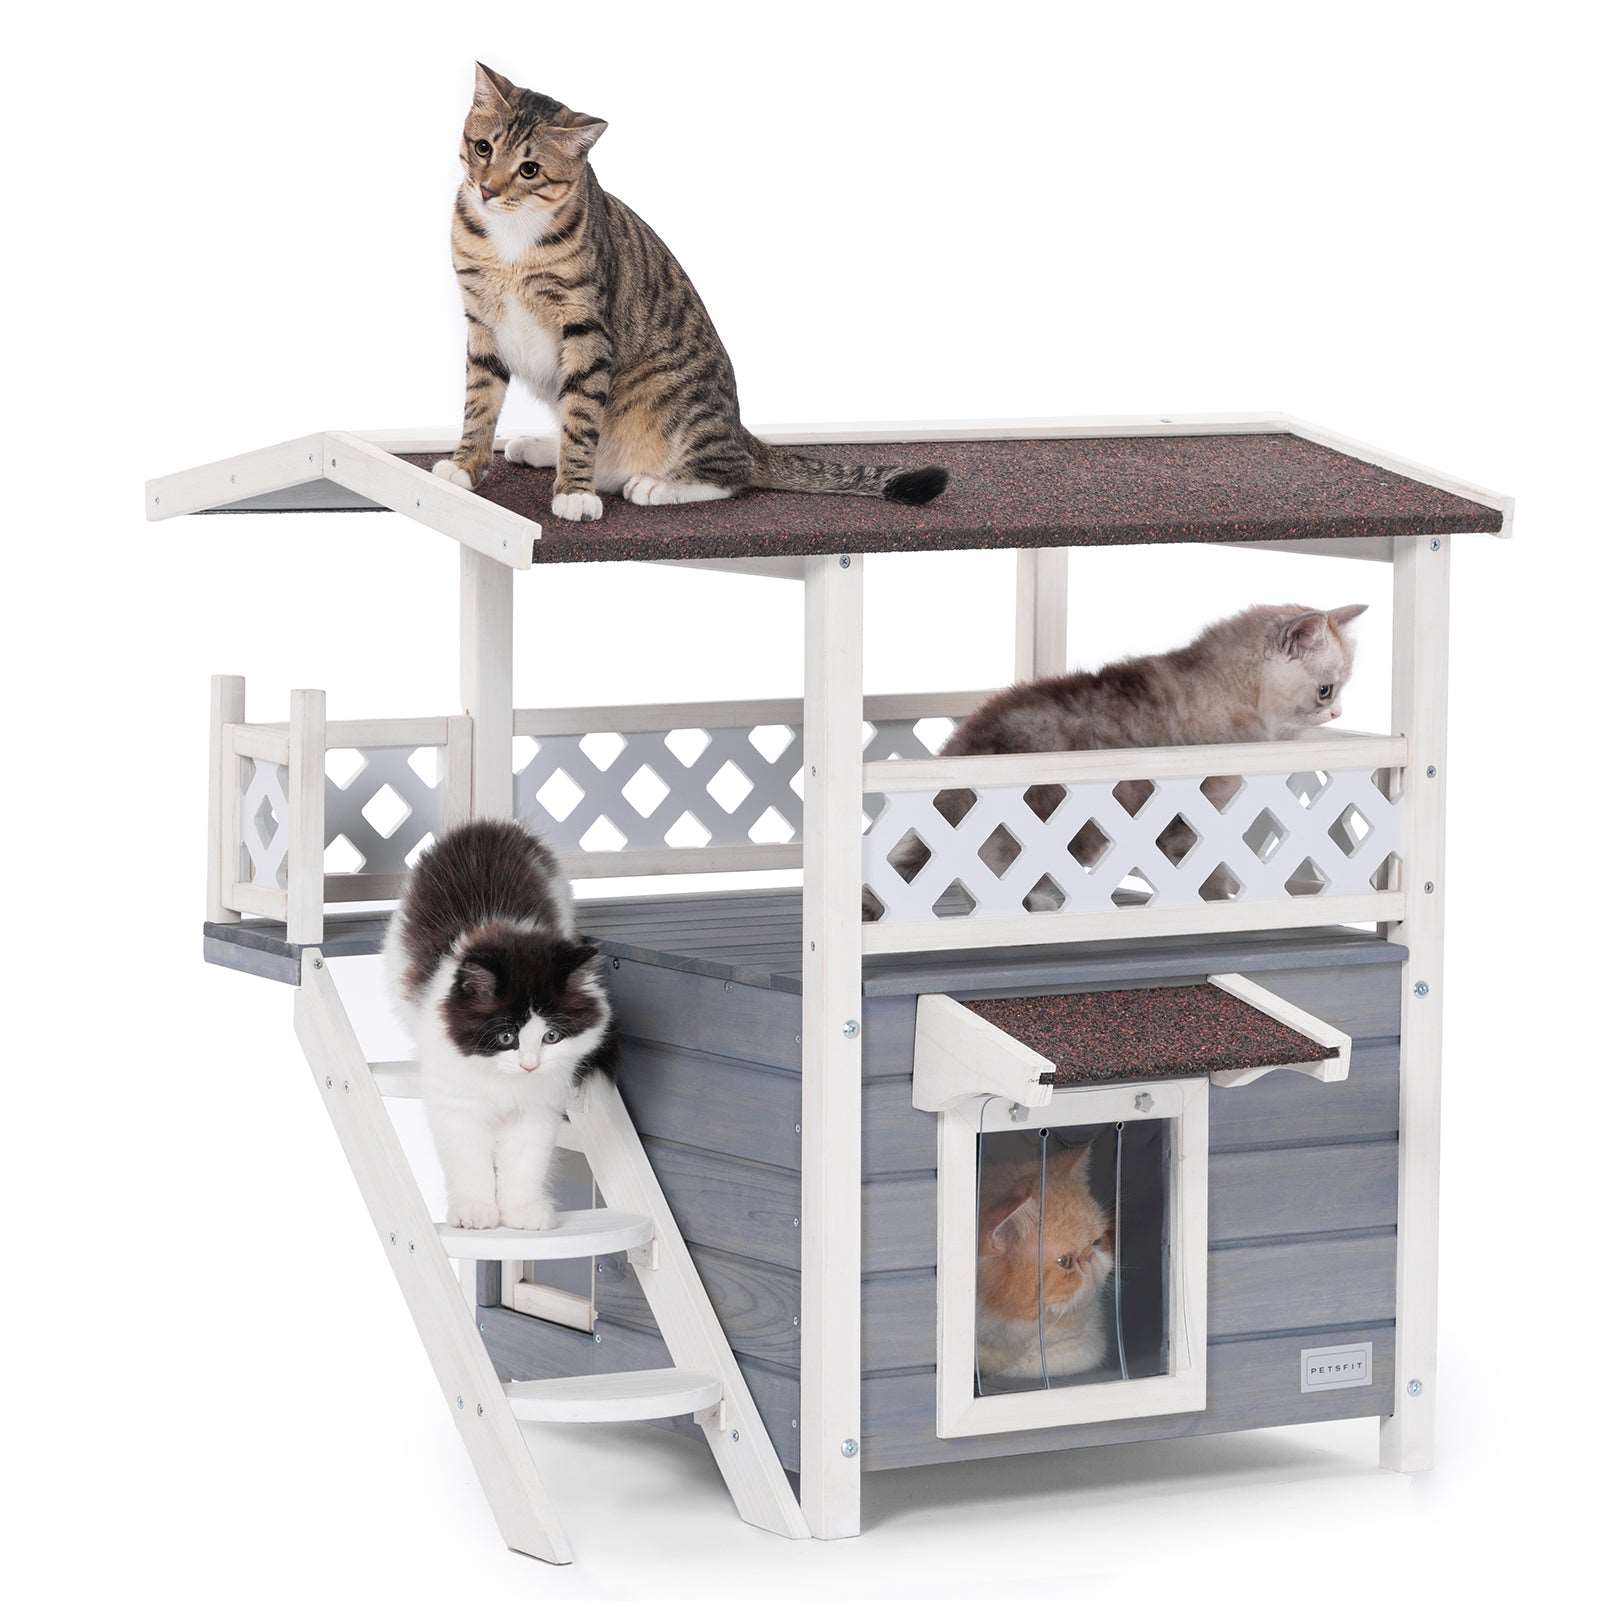 Petsfit-Cat-House-for-Outdoor-Feral-Cat-Shelter-for-1-2-Cats-03